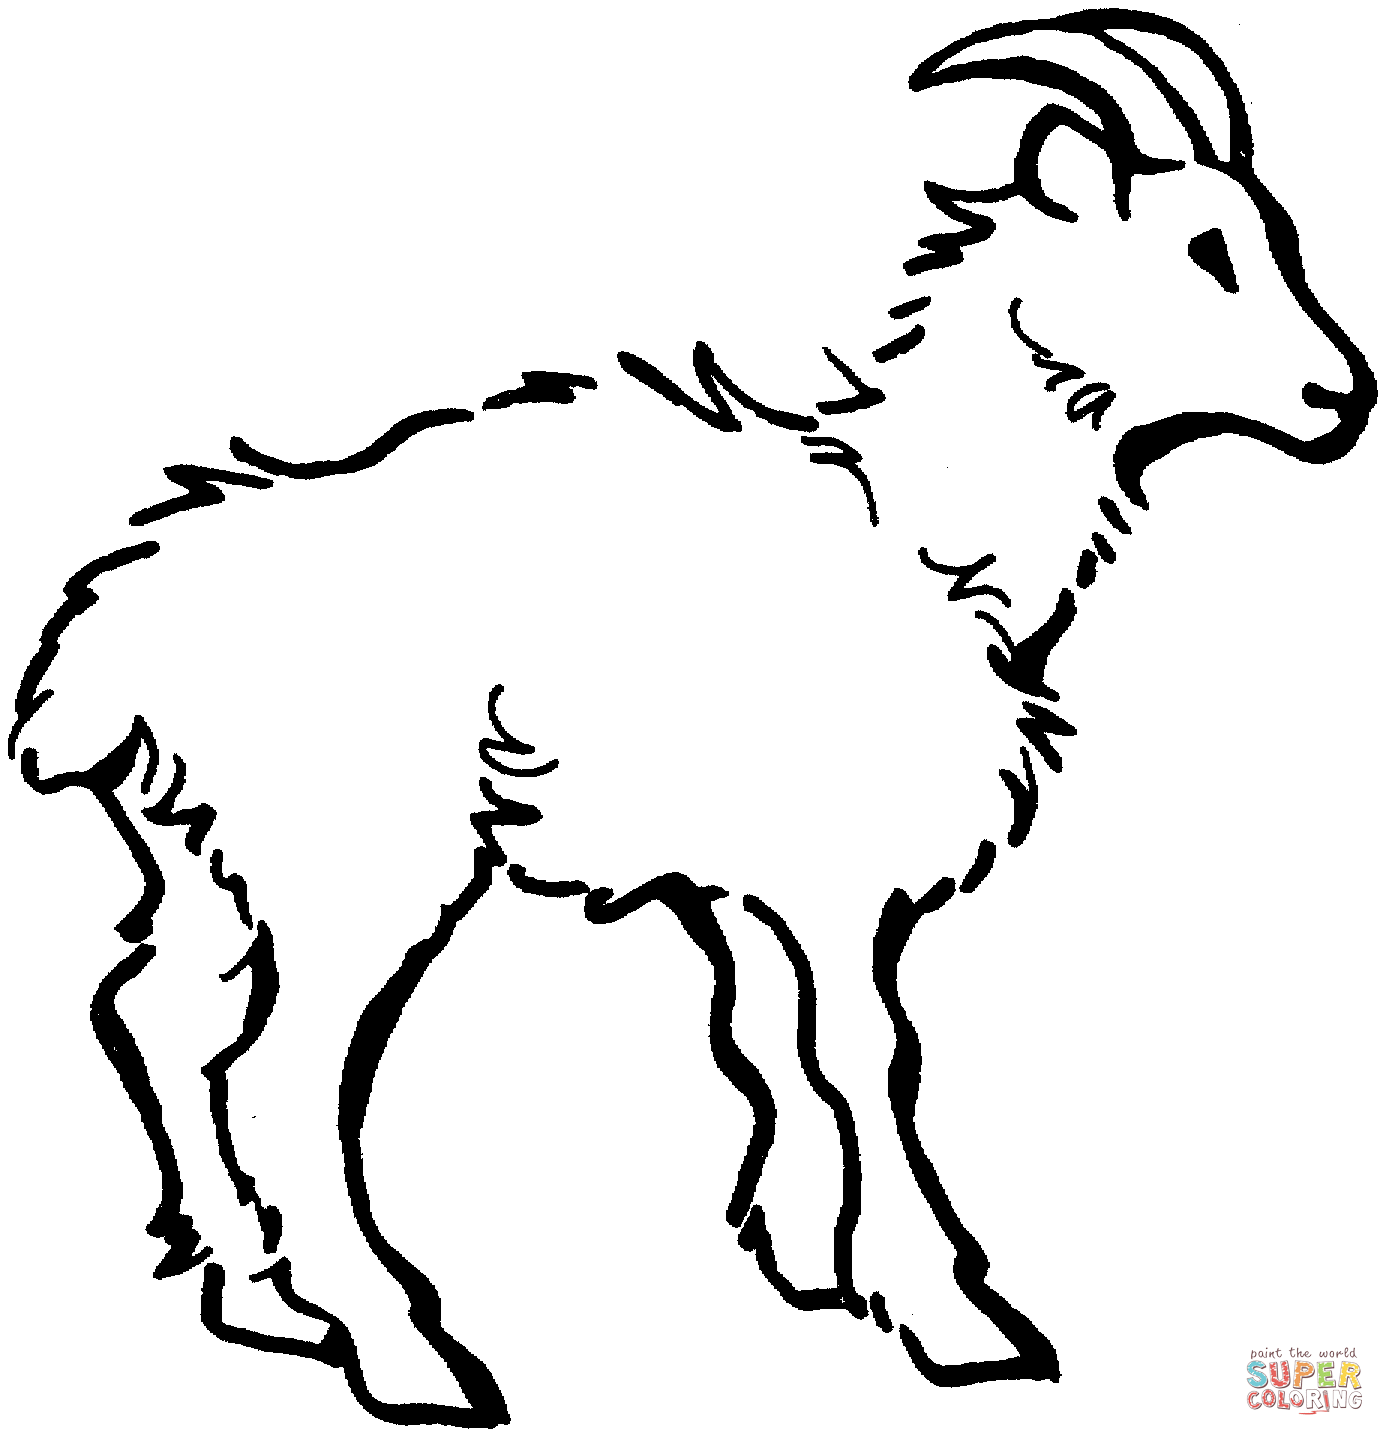 Domestic Goat 1 coloring page | Free Printable Coloring Pages